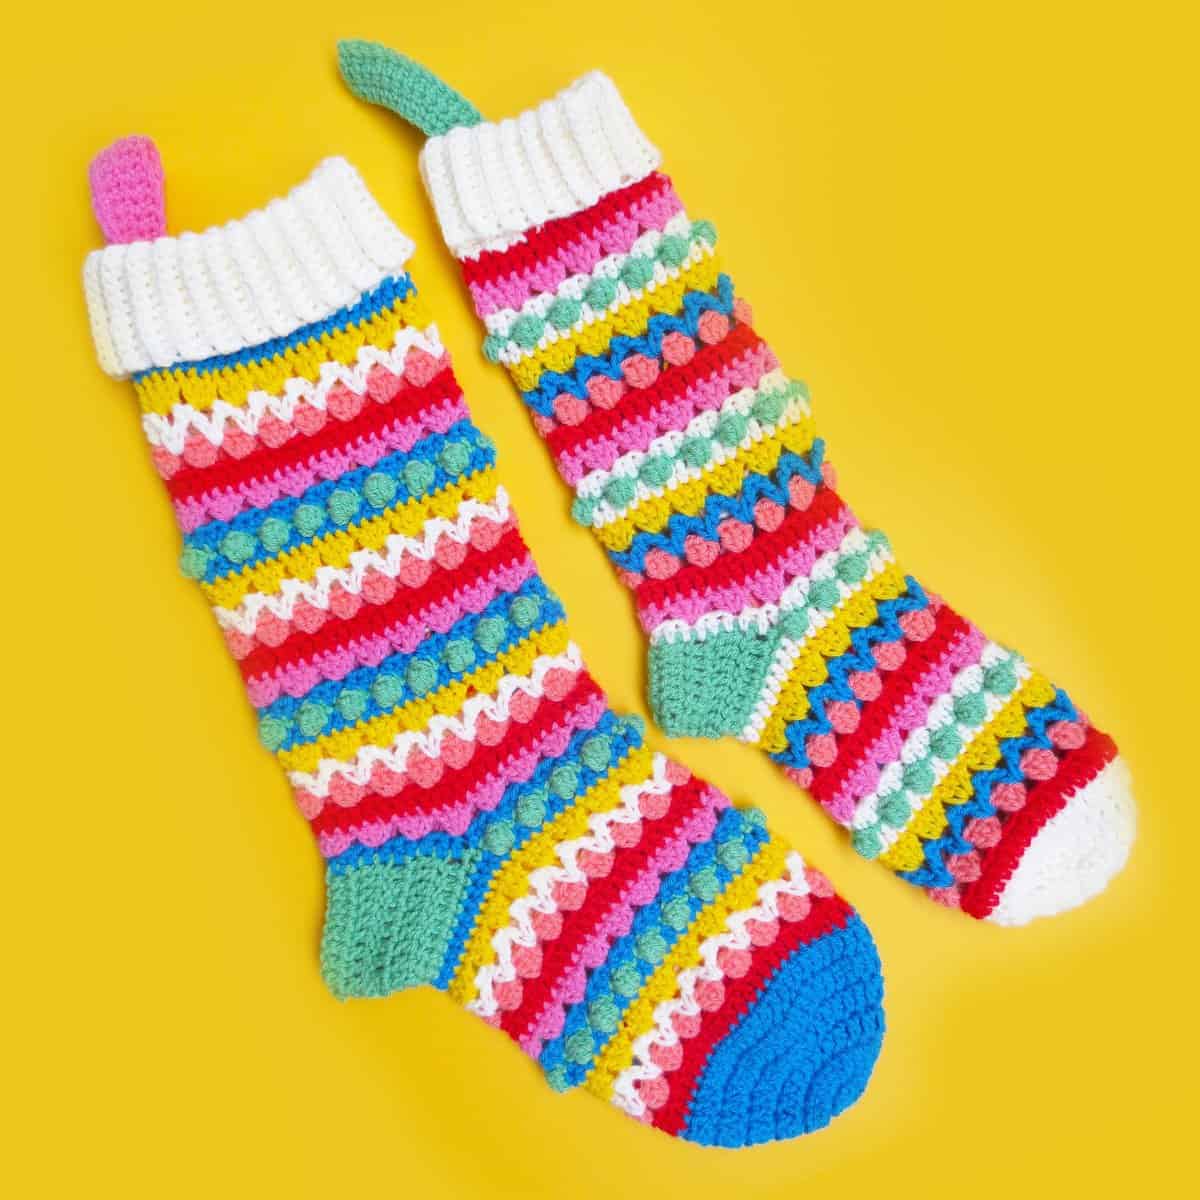 Crocheted multi-colored socks on a yellow background